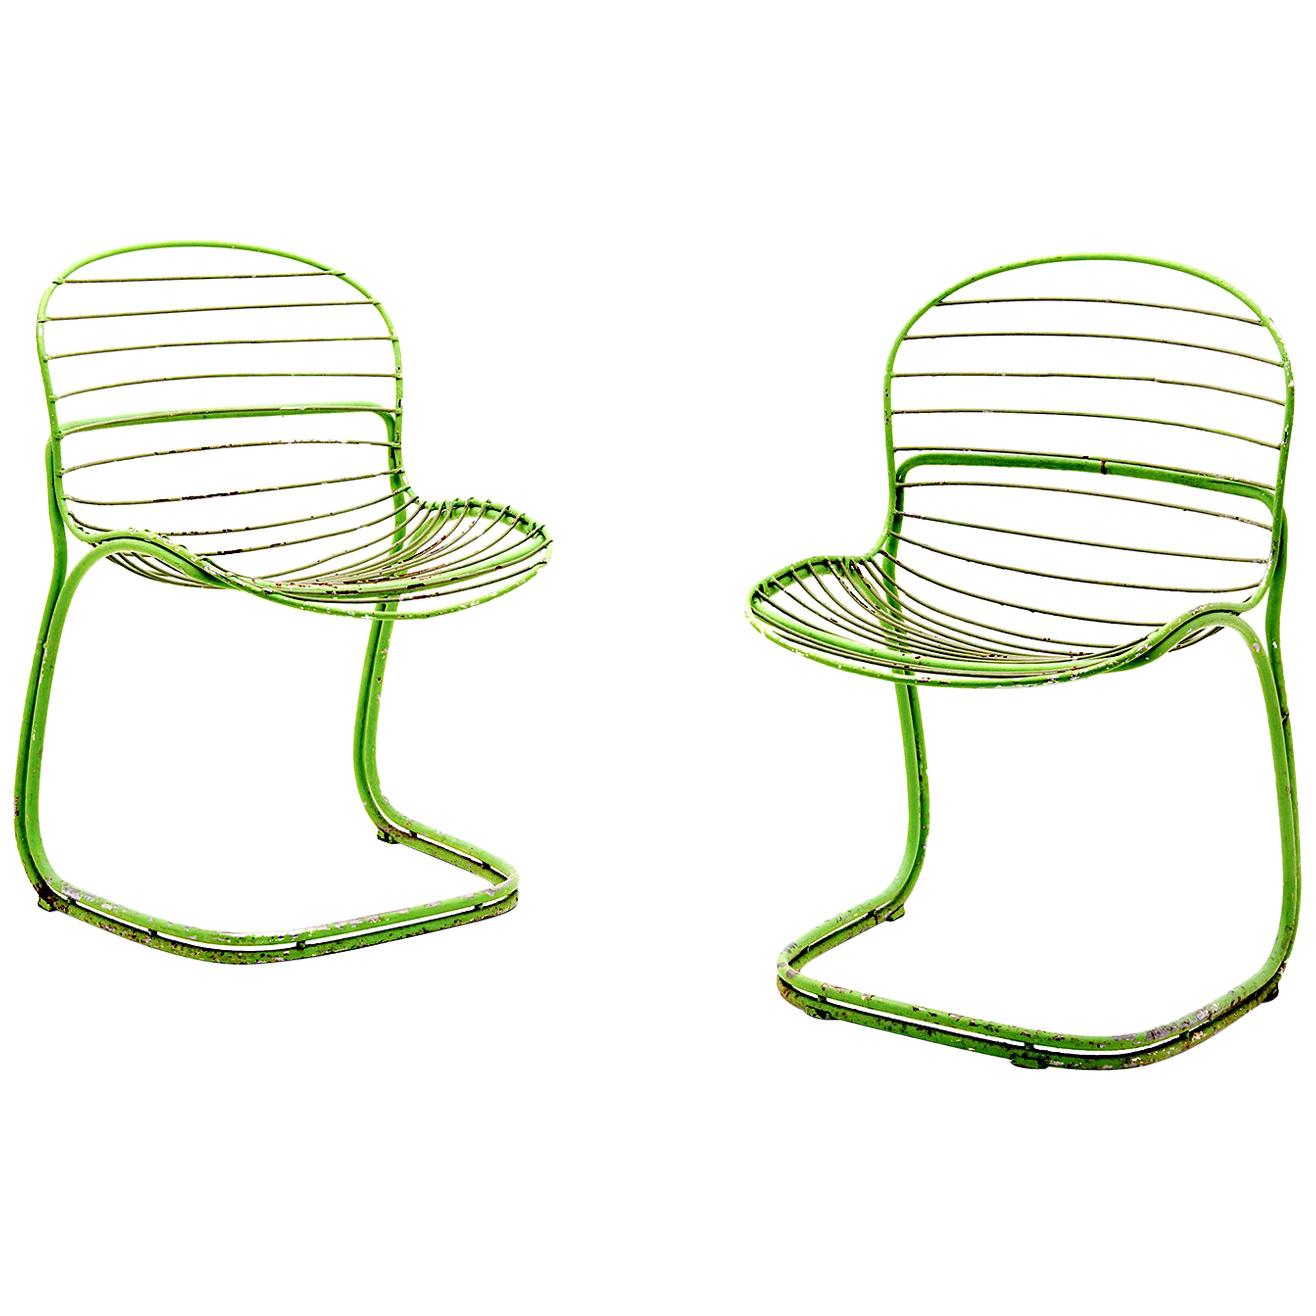 Chairs by Gastone Rinaldi, for RIMA, in Chromed Green Painted Metal, Italy, 1960